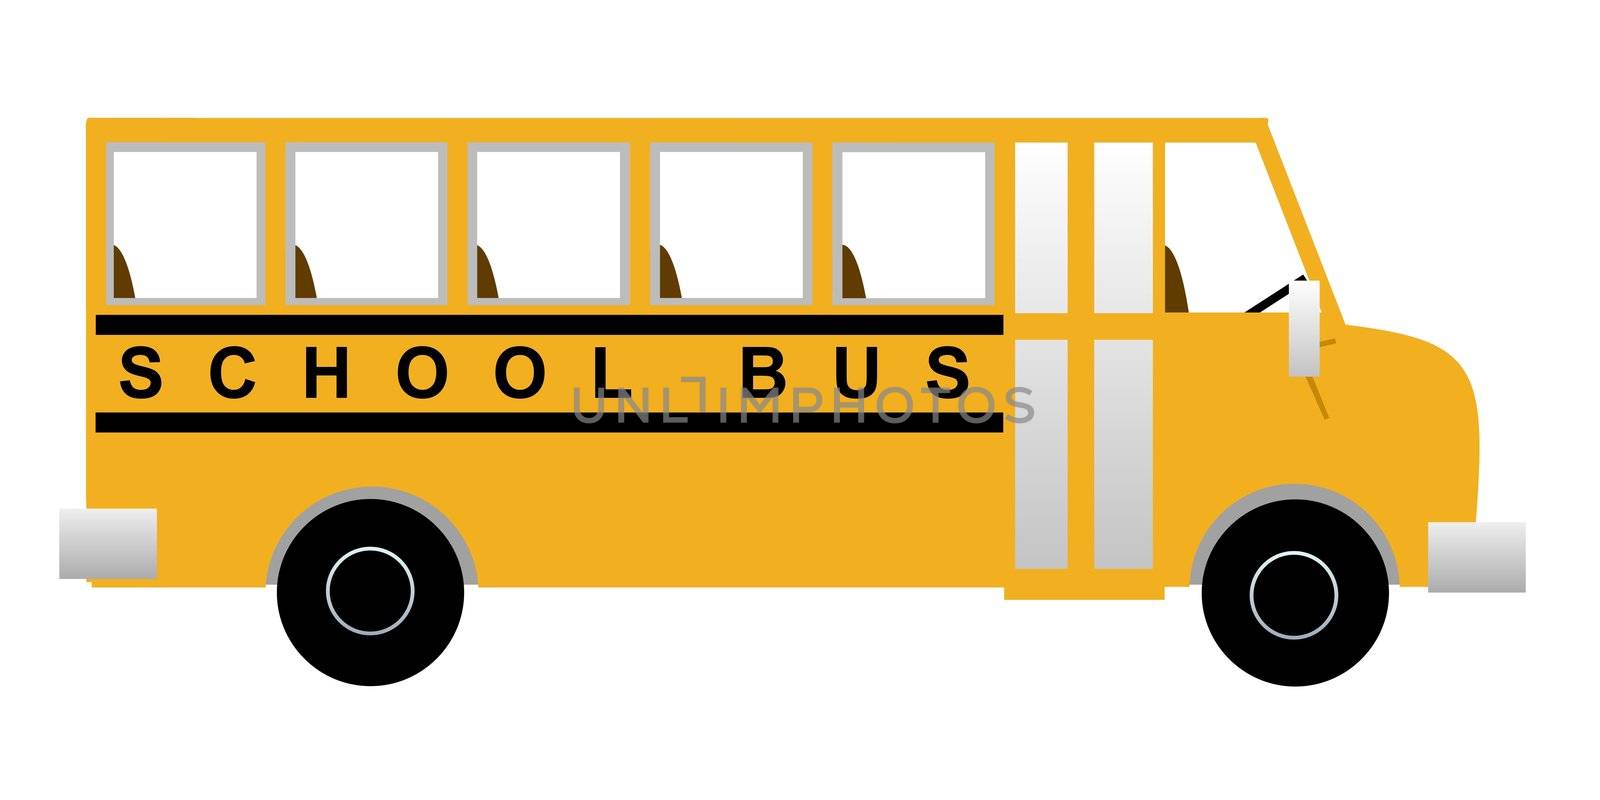 Illustration of a school bus from the side